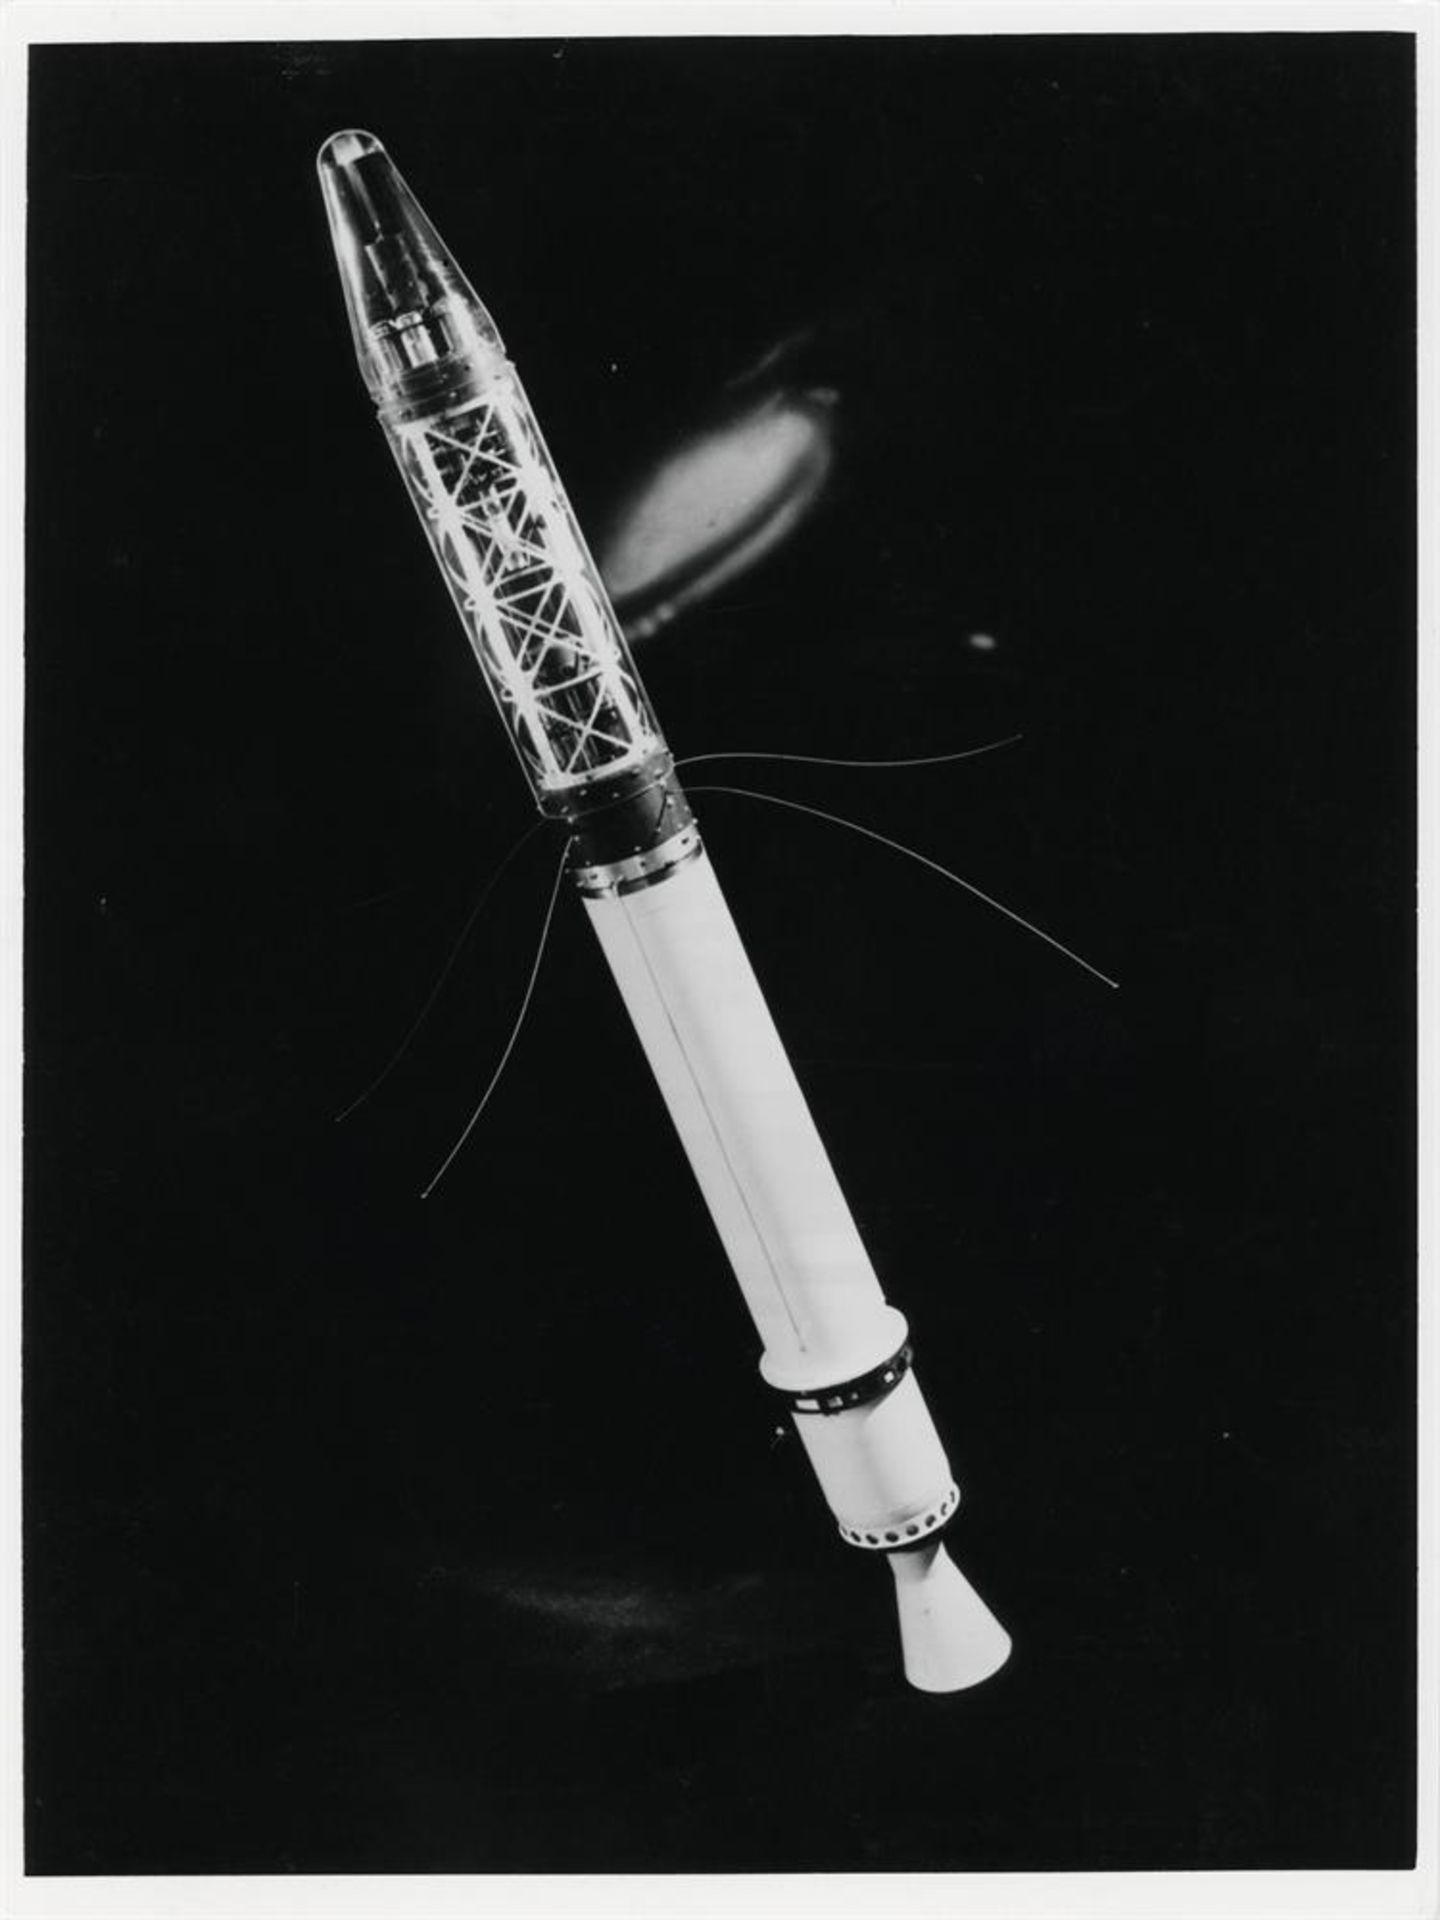 The first American satellite Explorer I, January - March 1958 - Image 4 of 7